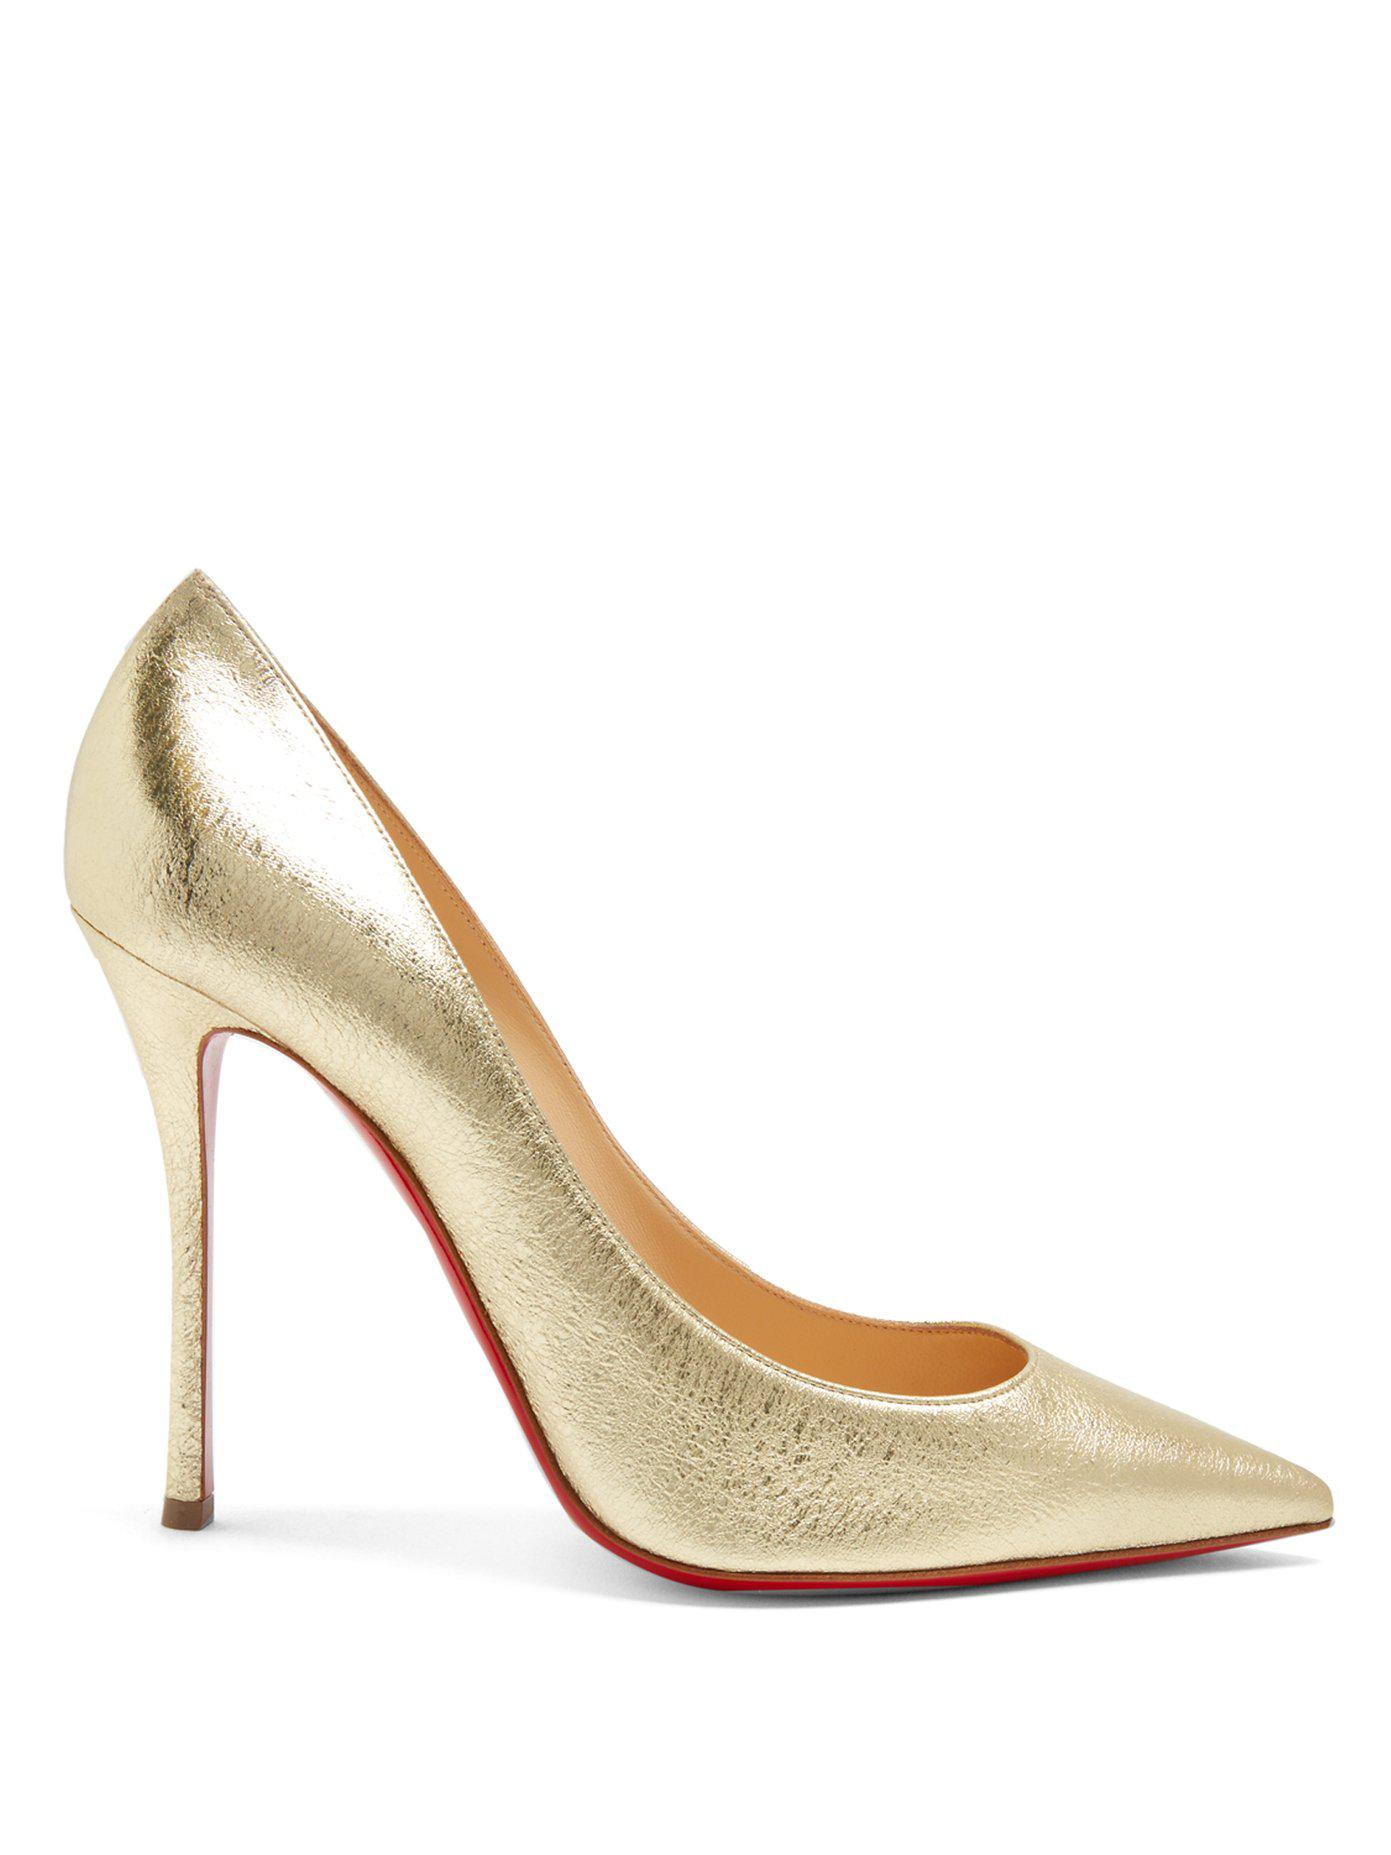 Christian Louboutin Decoltish Leather Pumps in Gold (Metallic) | Lyst ...